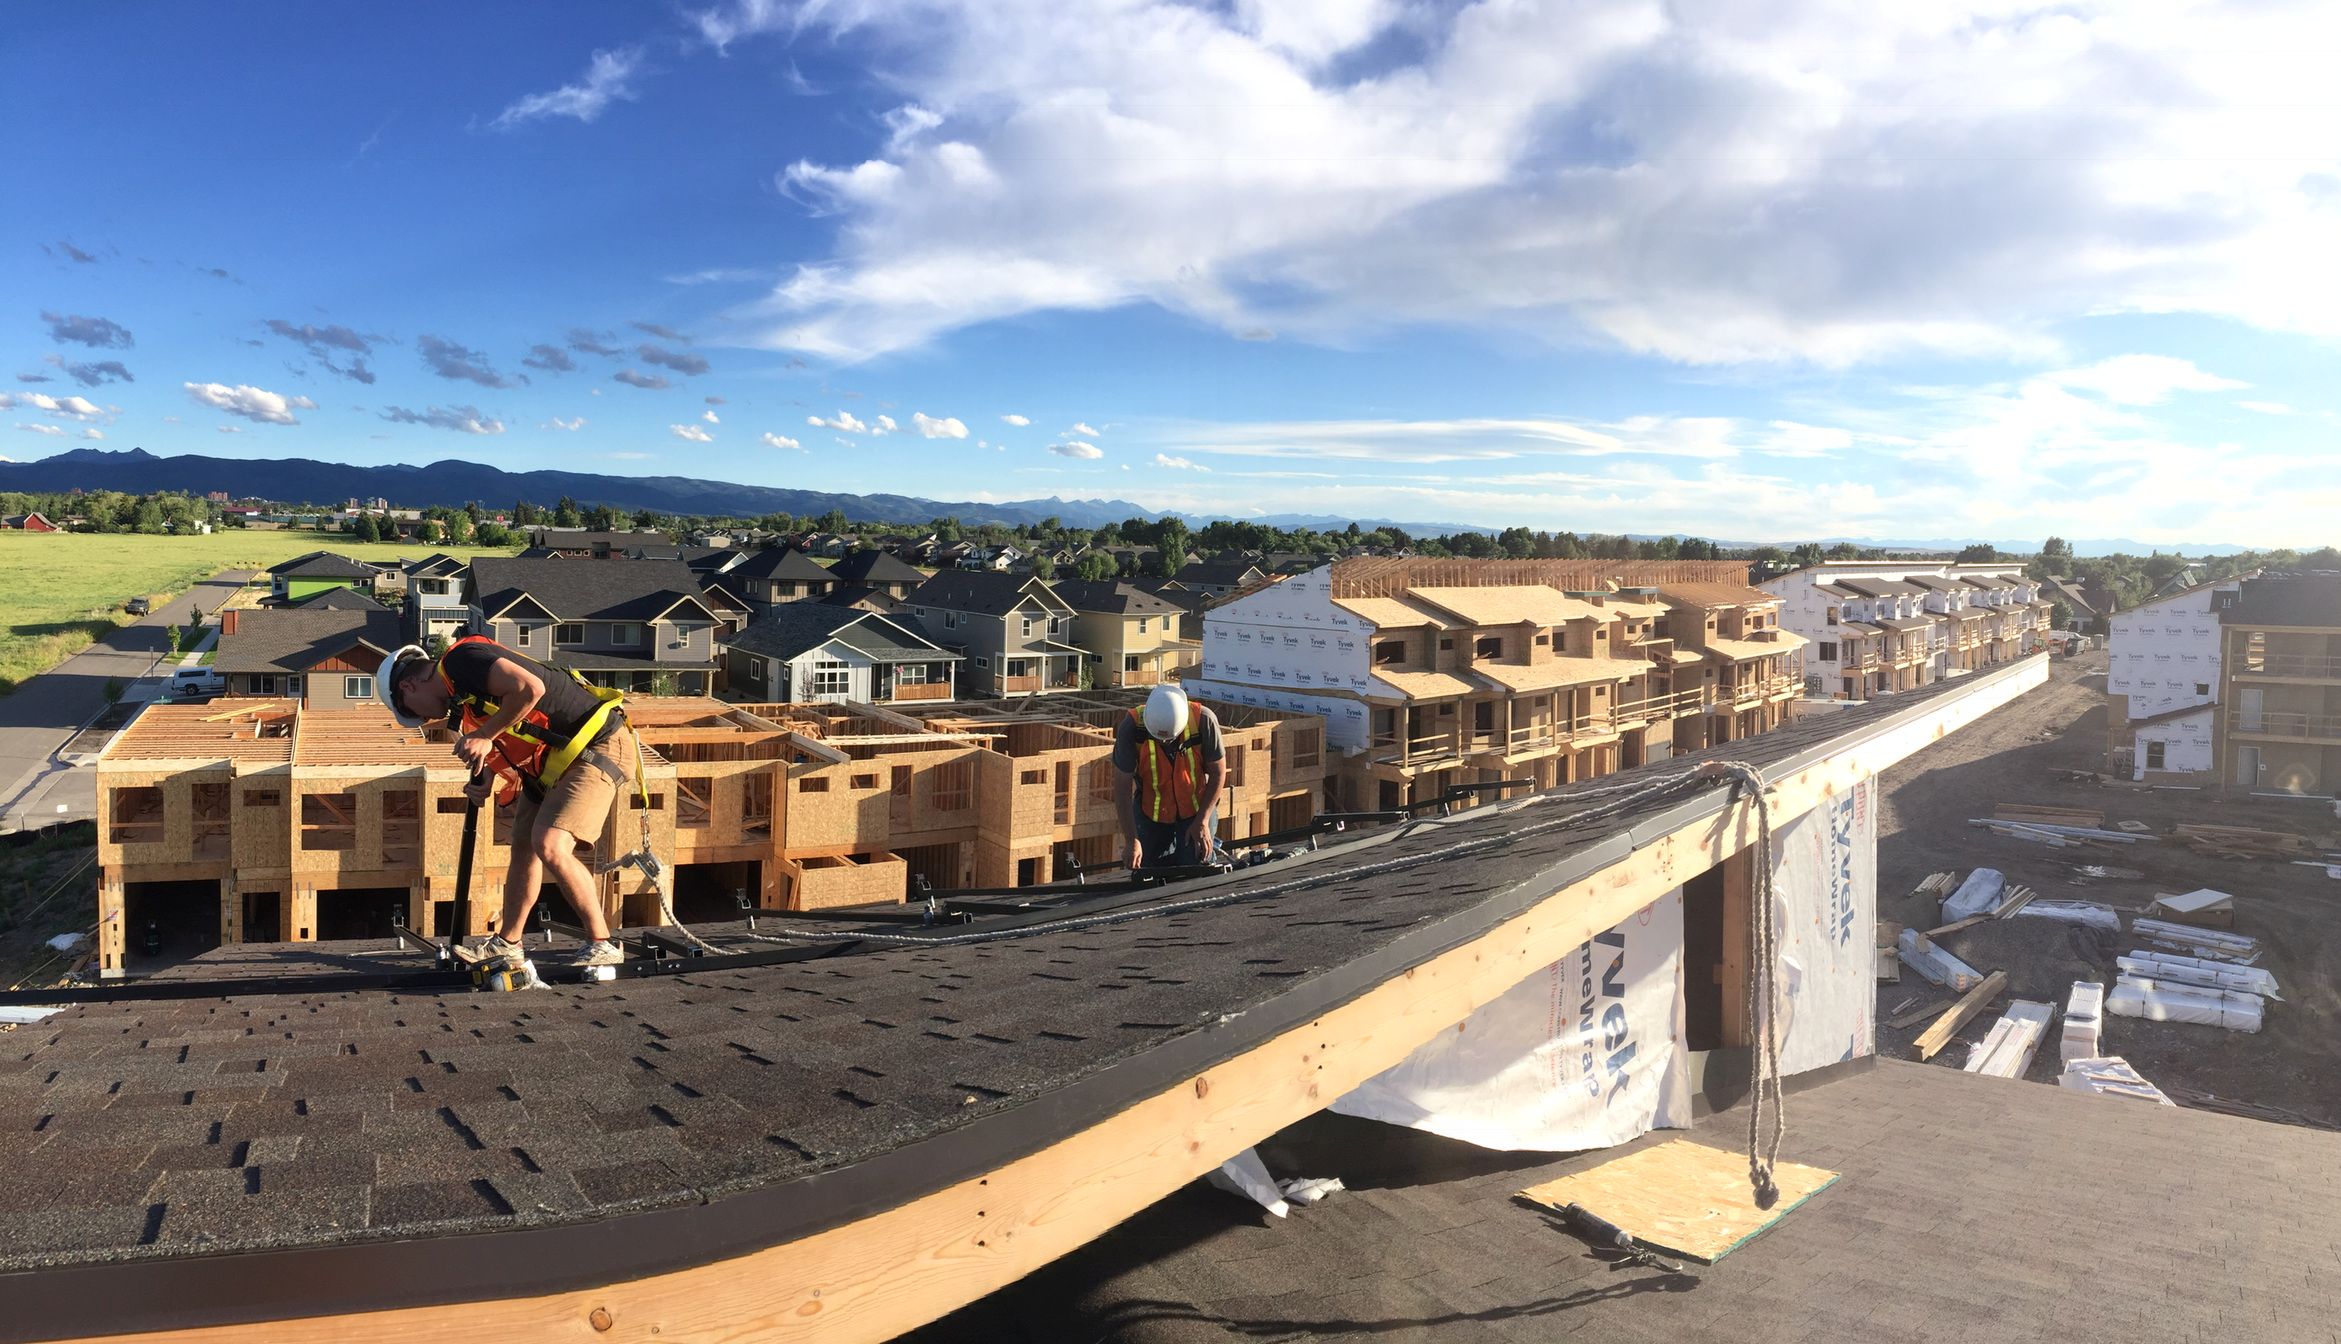 Solar Hot Water and Solar Electricity Cut Costs for Bozeman Affordable Housing Project